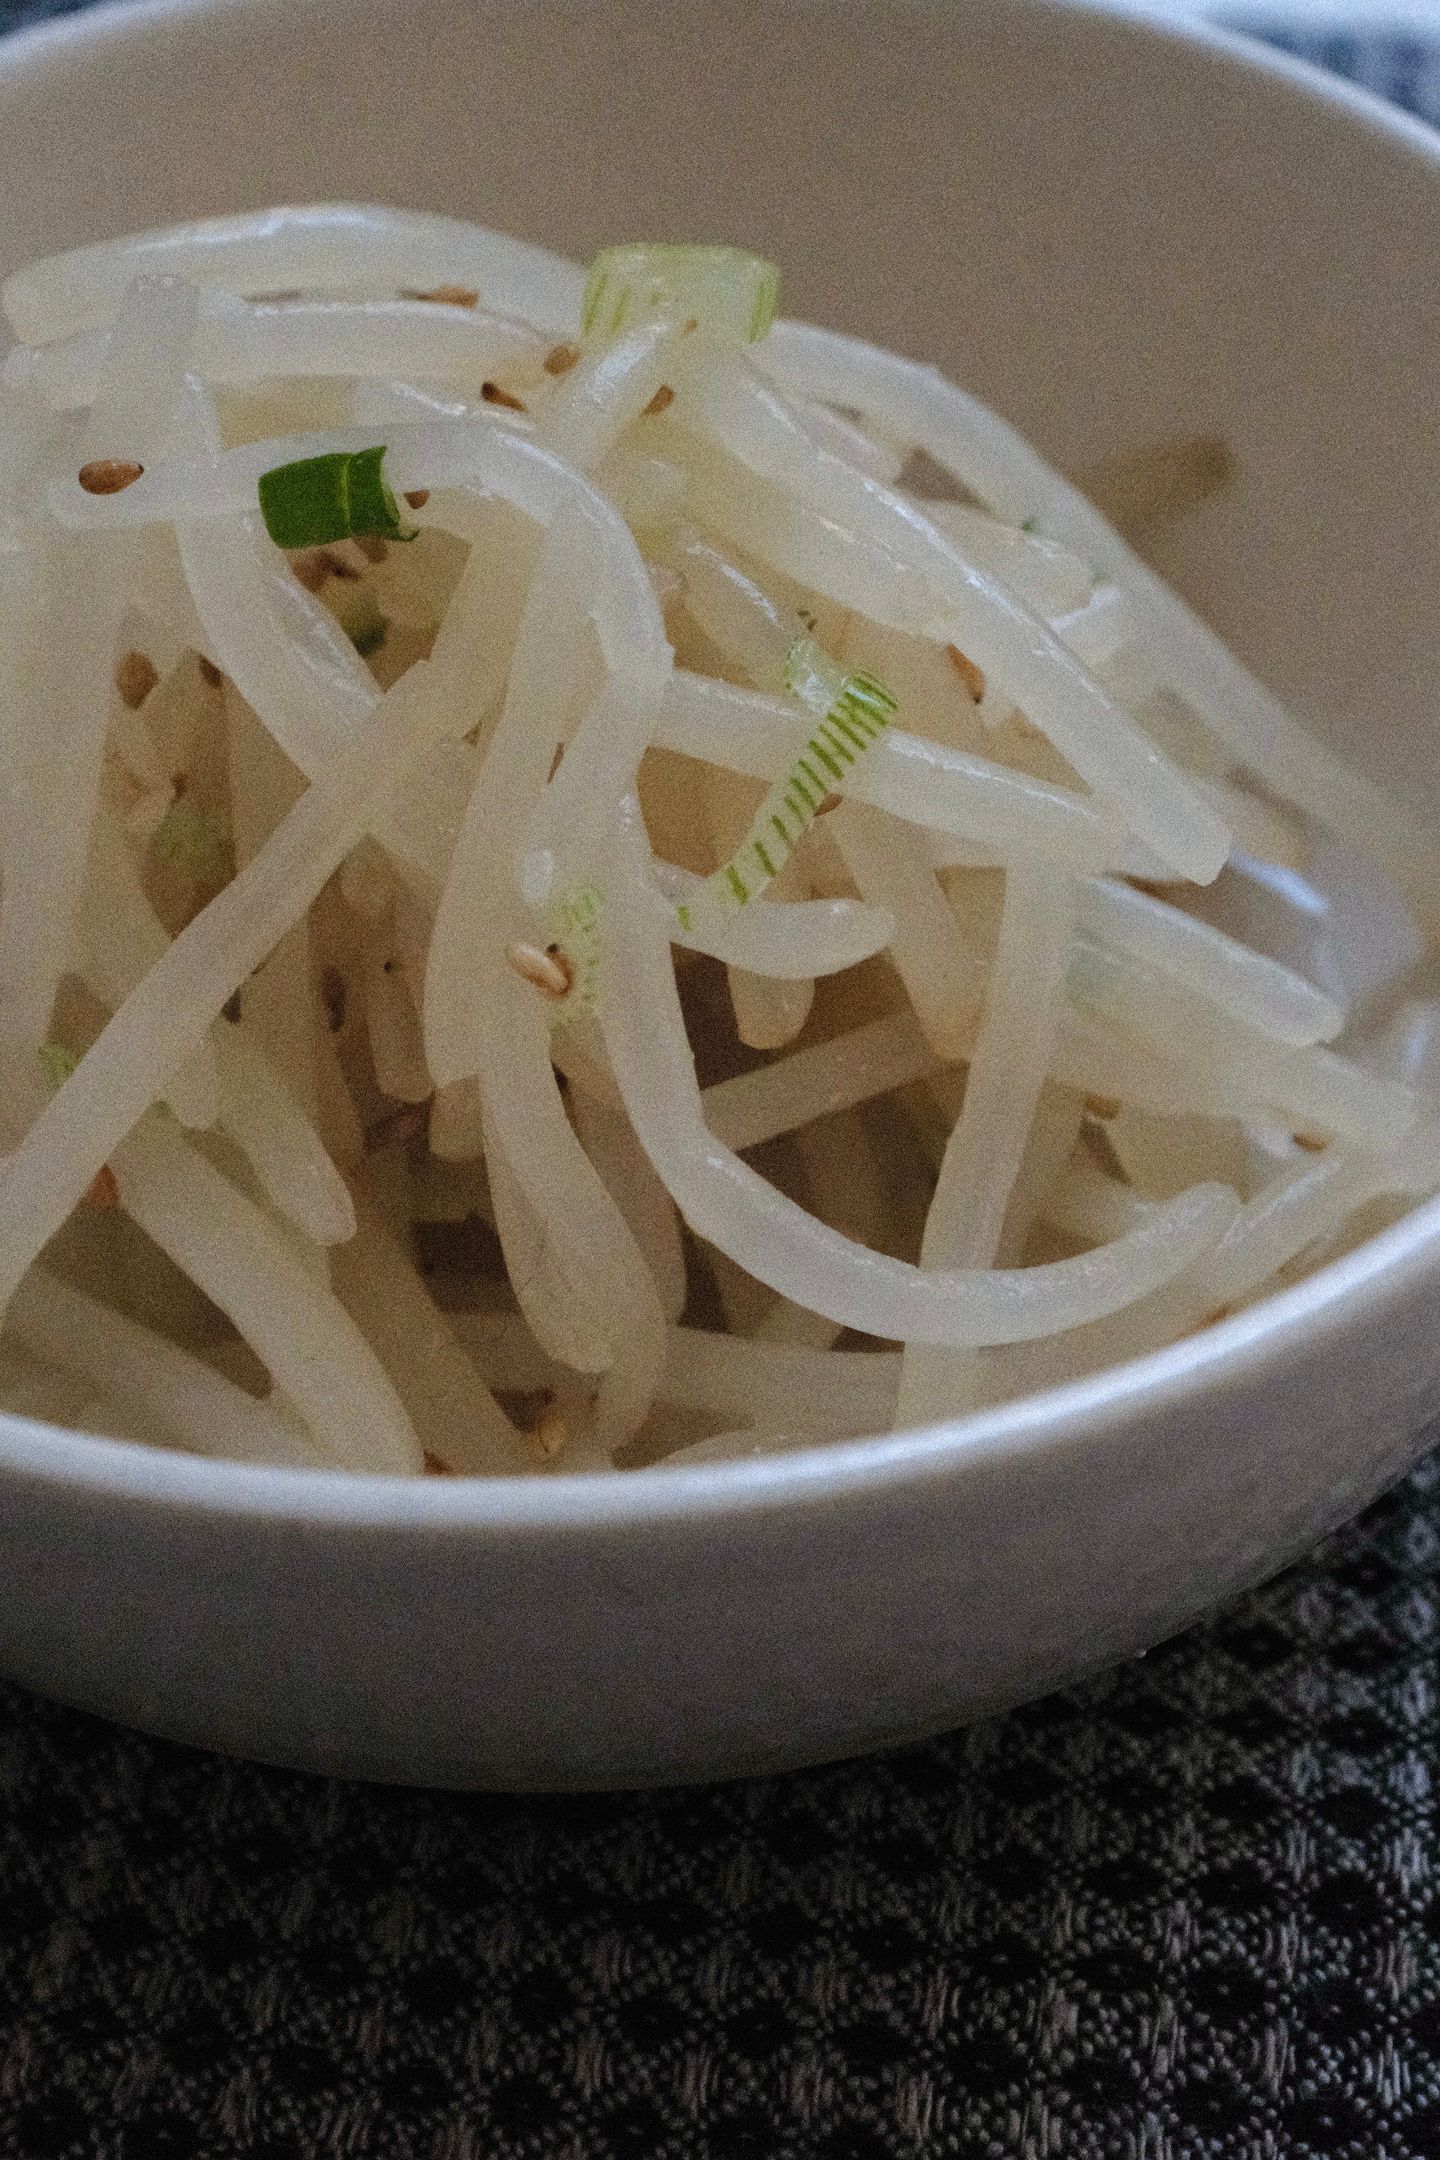 mung bean sprouts